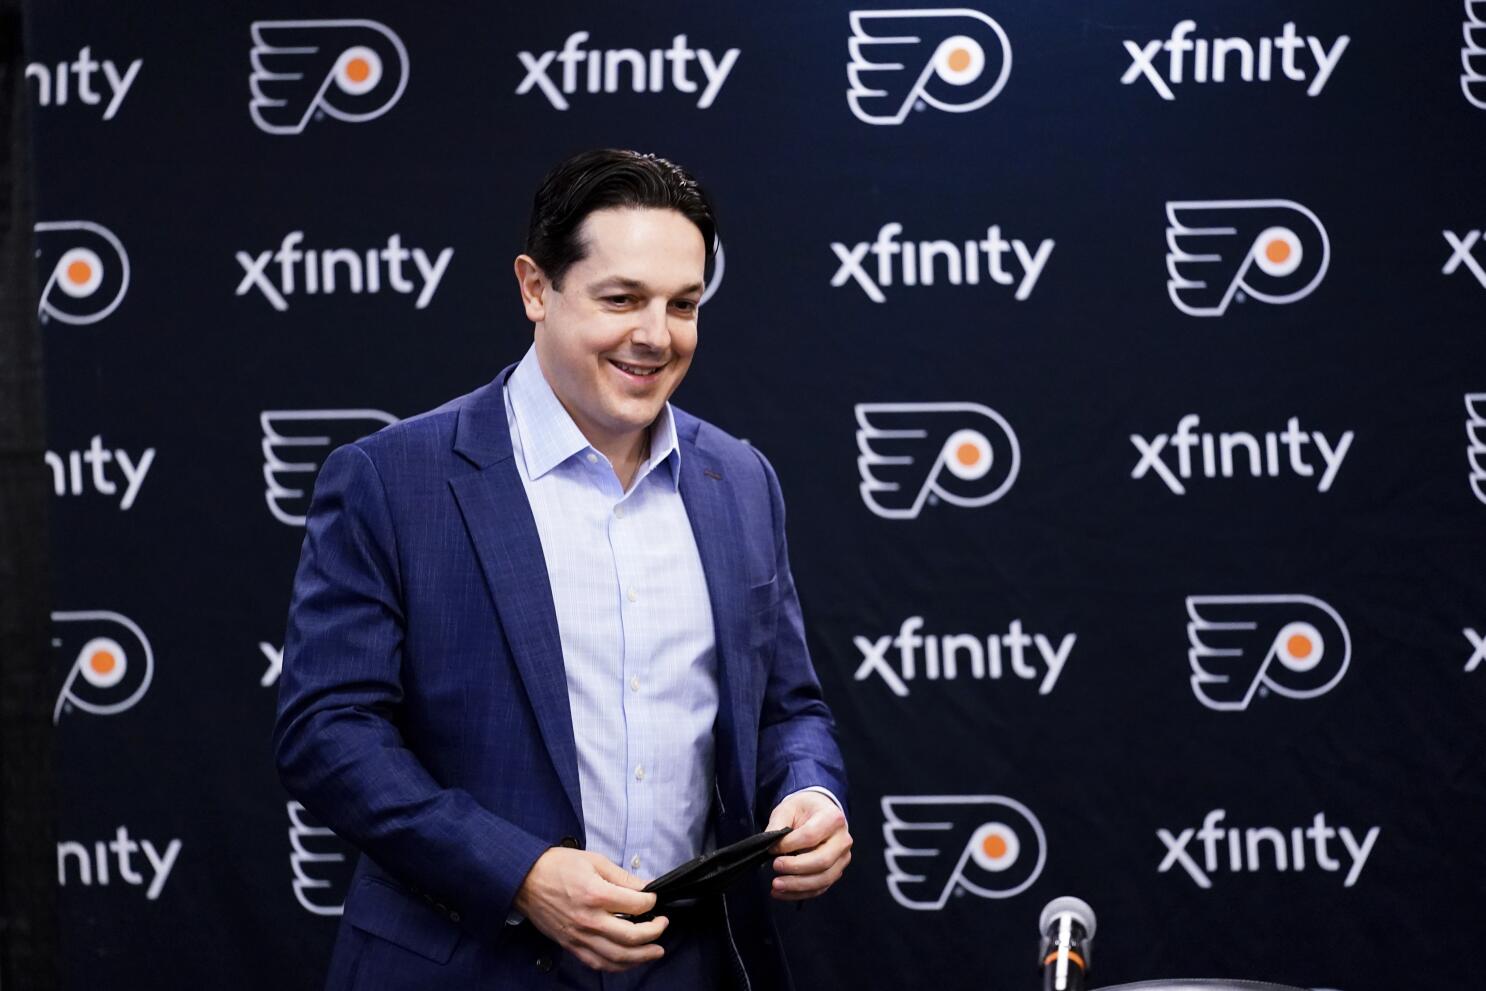 Exclusive: Flyers to Name Danny Briere Assistant GM - Crossing Broad